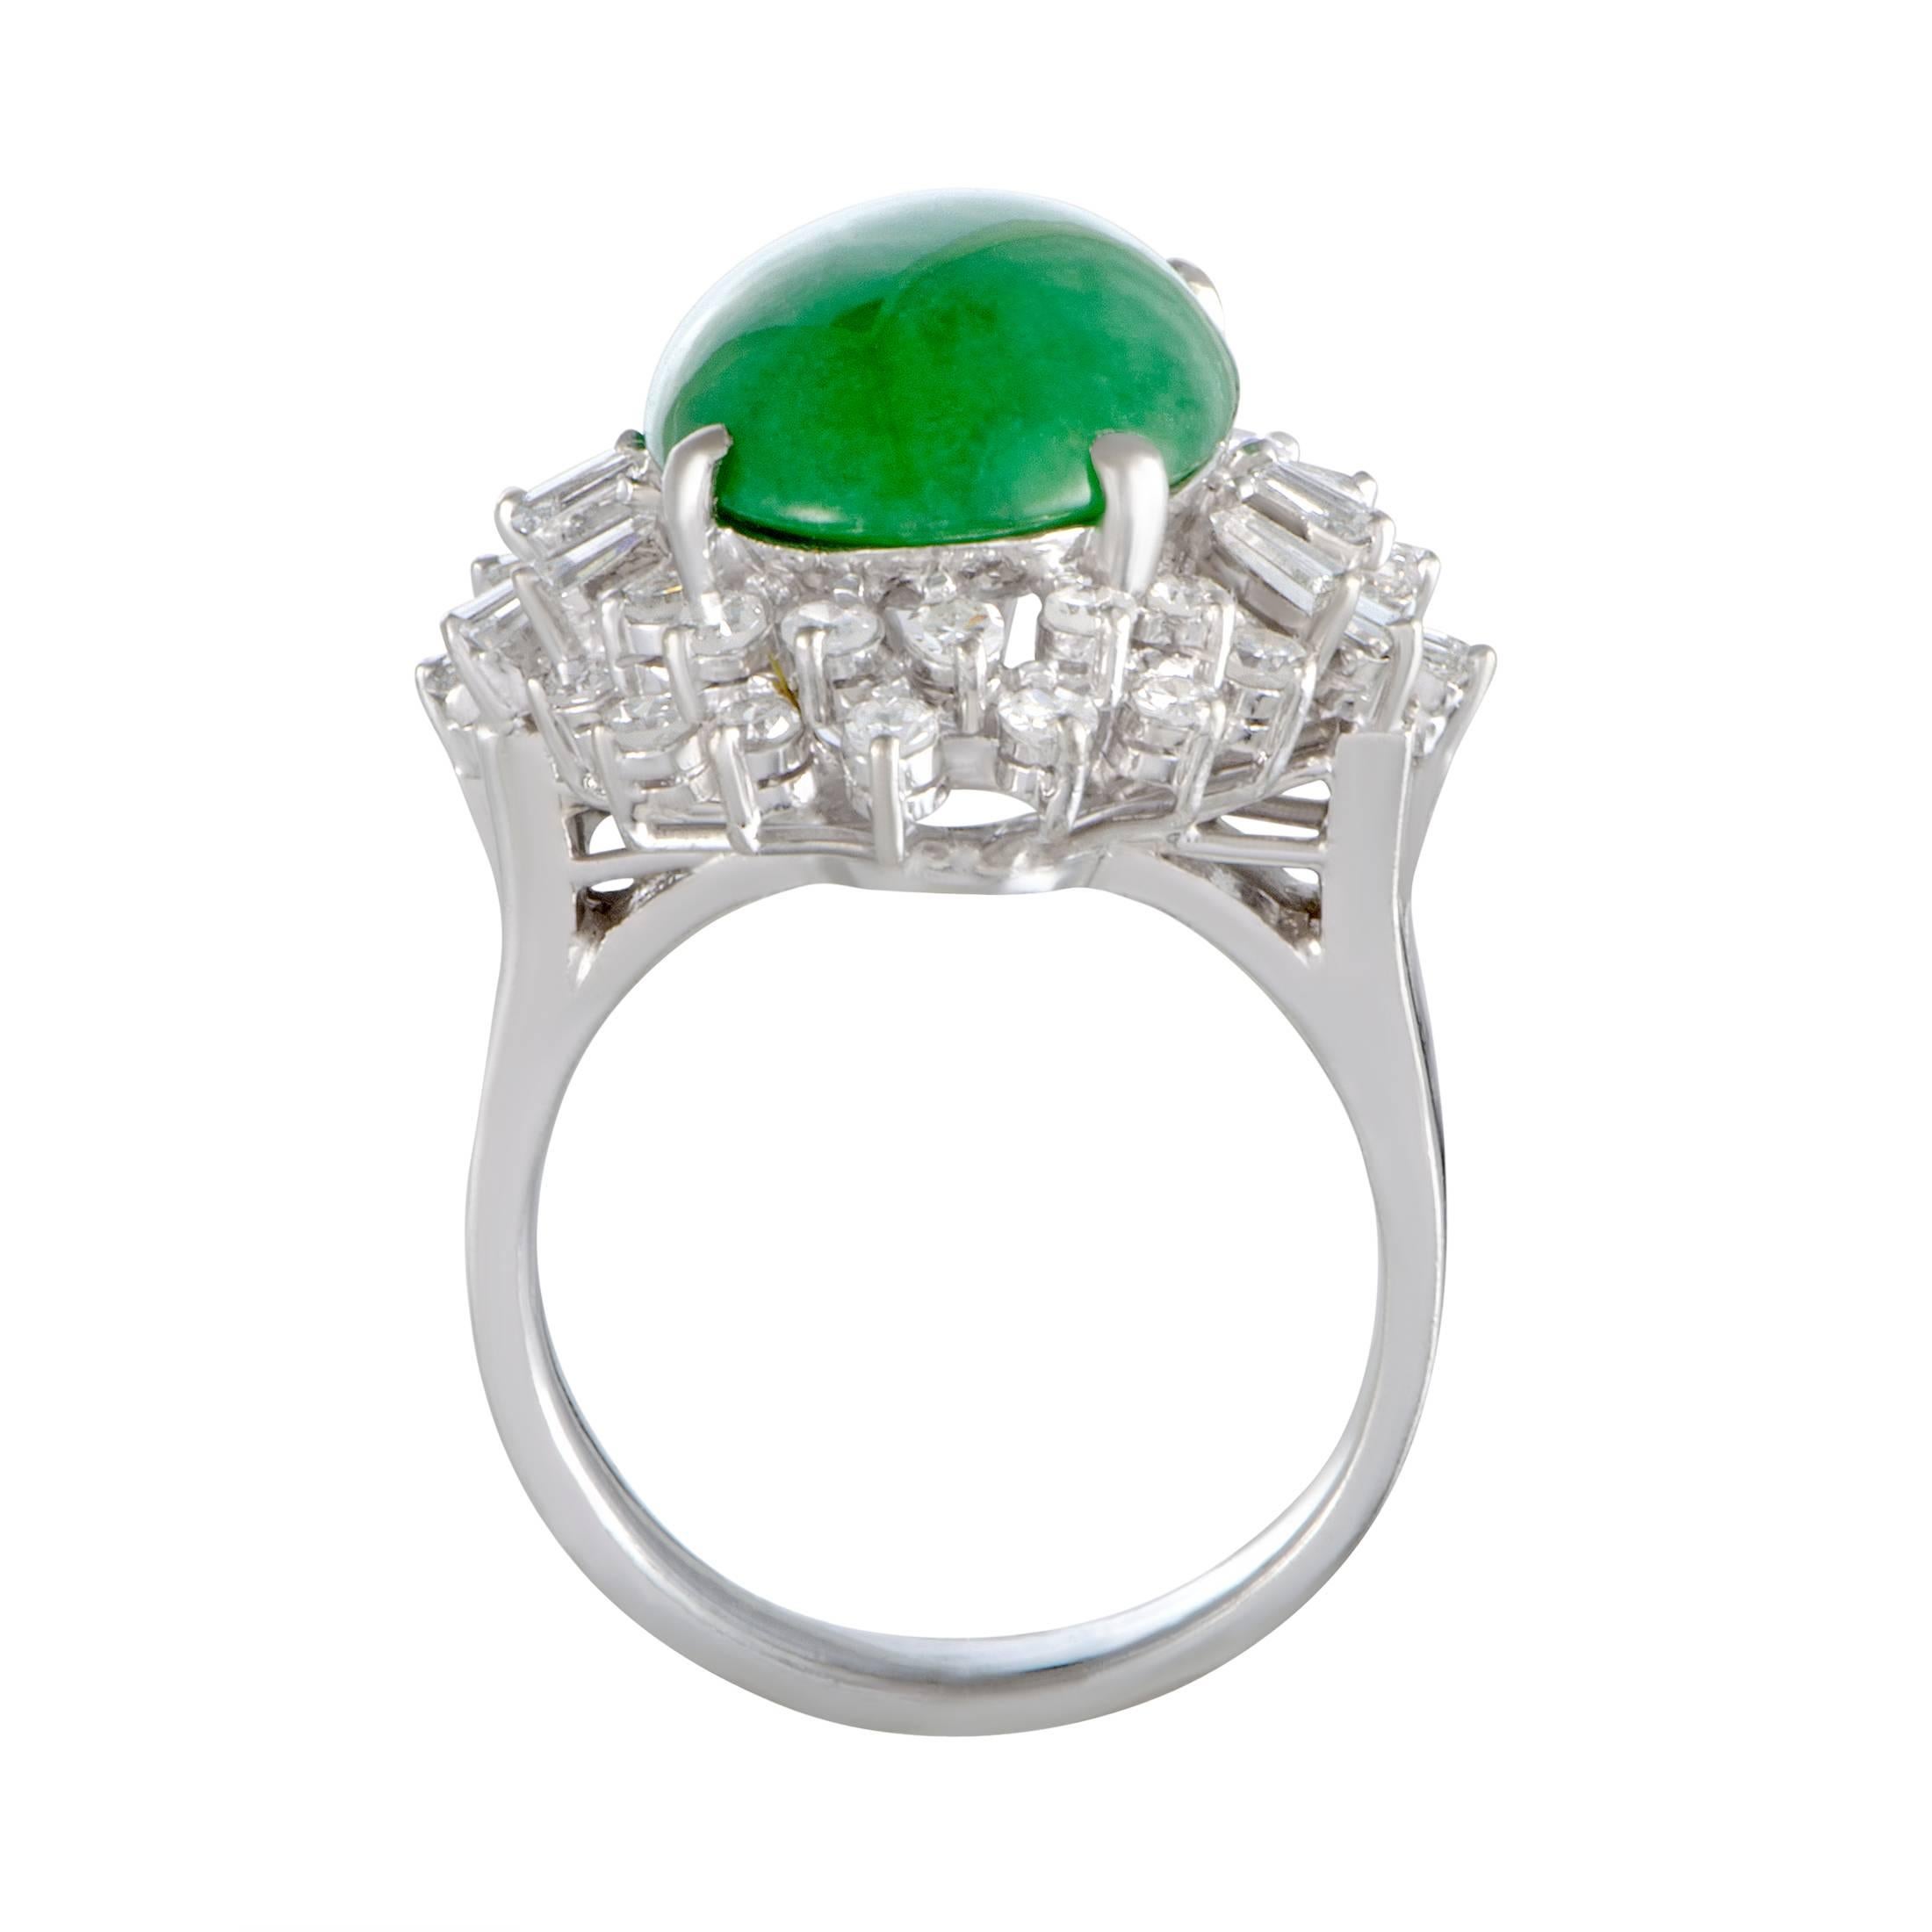 Set amidst a plethora of diversely cut diamond stones, the eye-catching green jade lends its compelling allure to this spectacular ring. The ring is crafted from luxurious platinum and it boasts a total of 0.85 carats of diamonds.
Ring Top